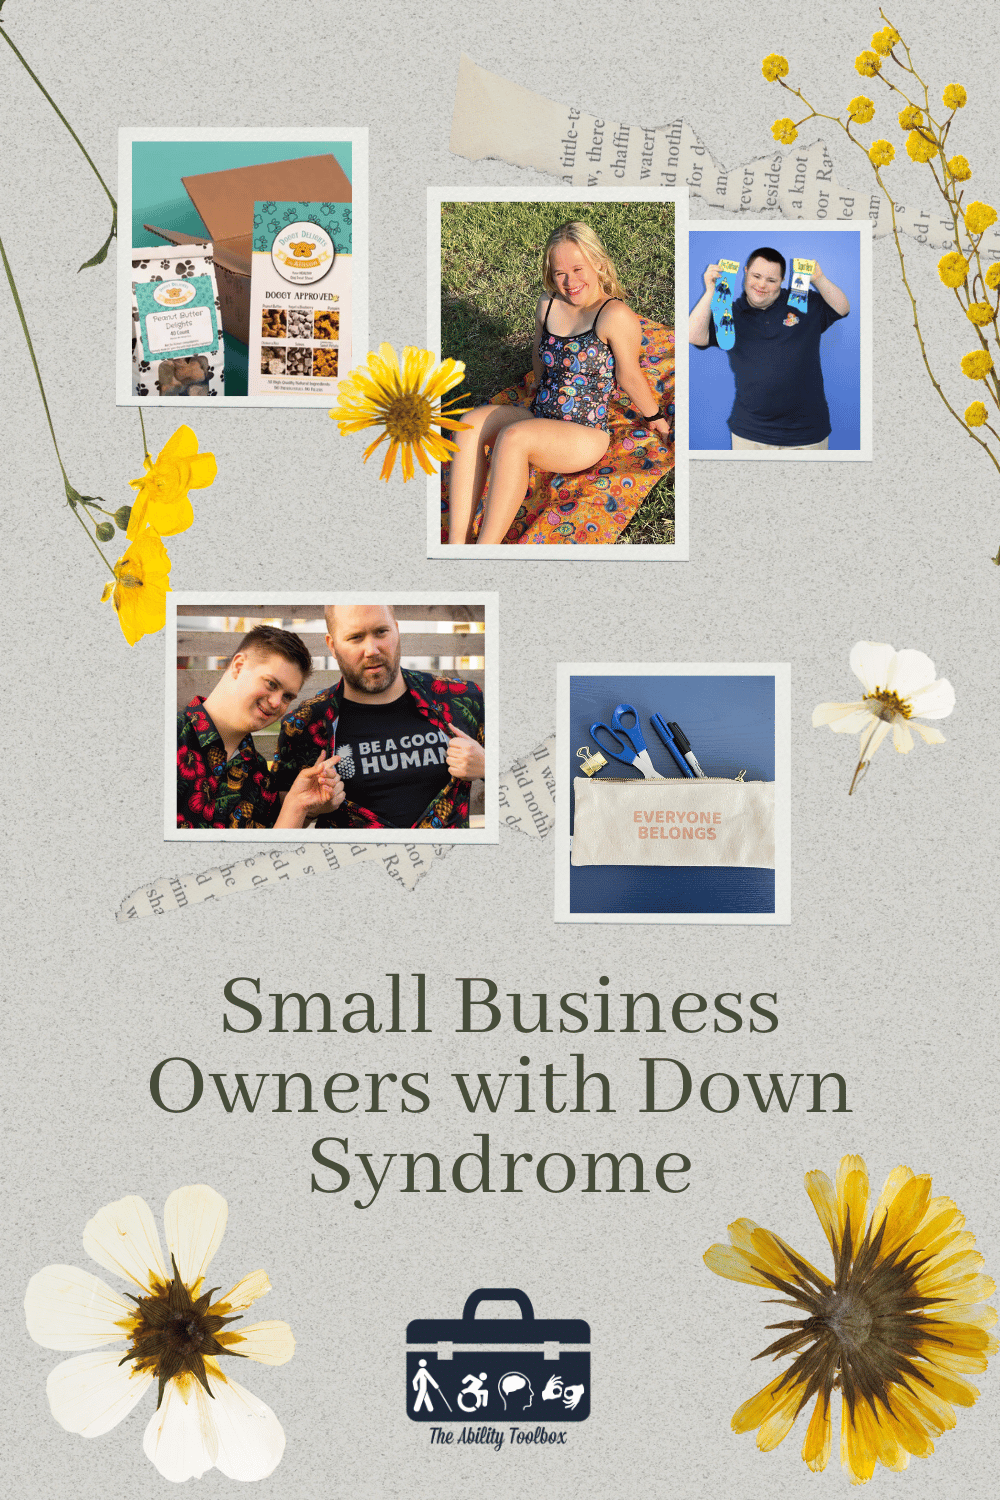 Businesses owned by people with Down syndrome - collage of products